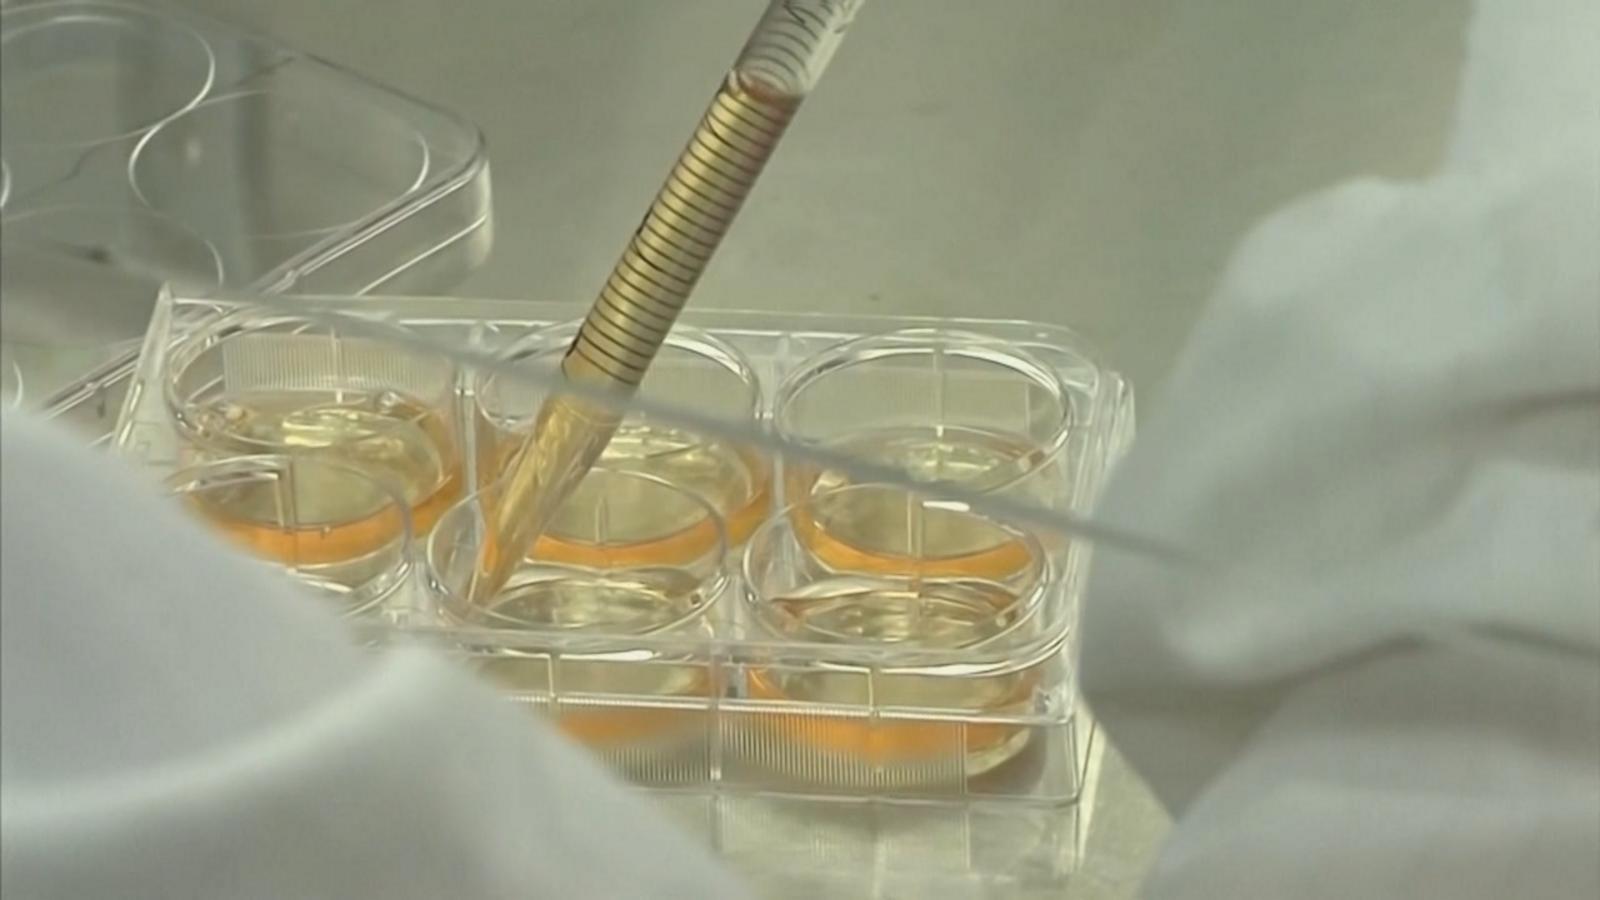 VIDEO: New Alabama IVF bill signed into law